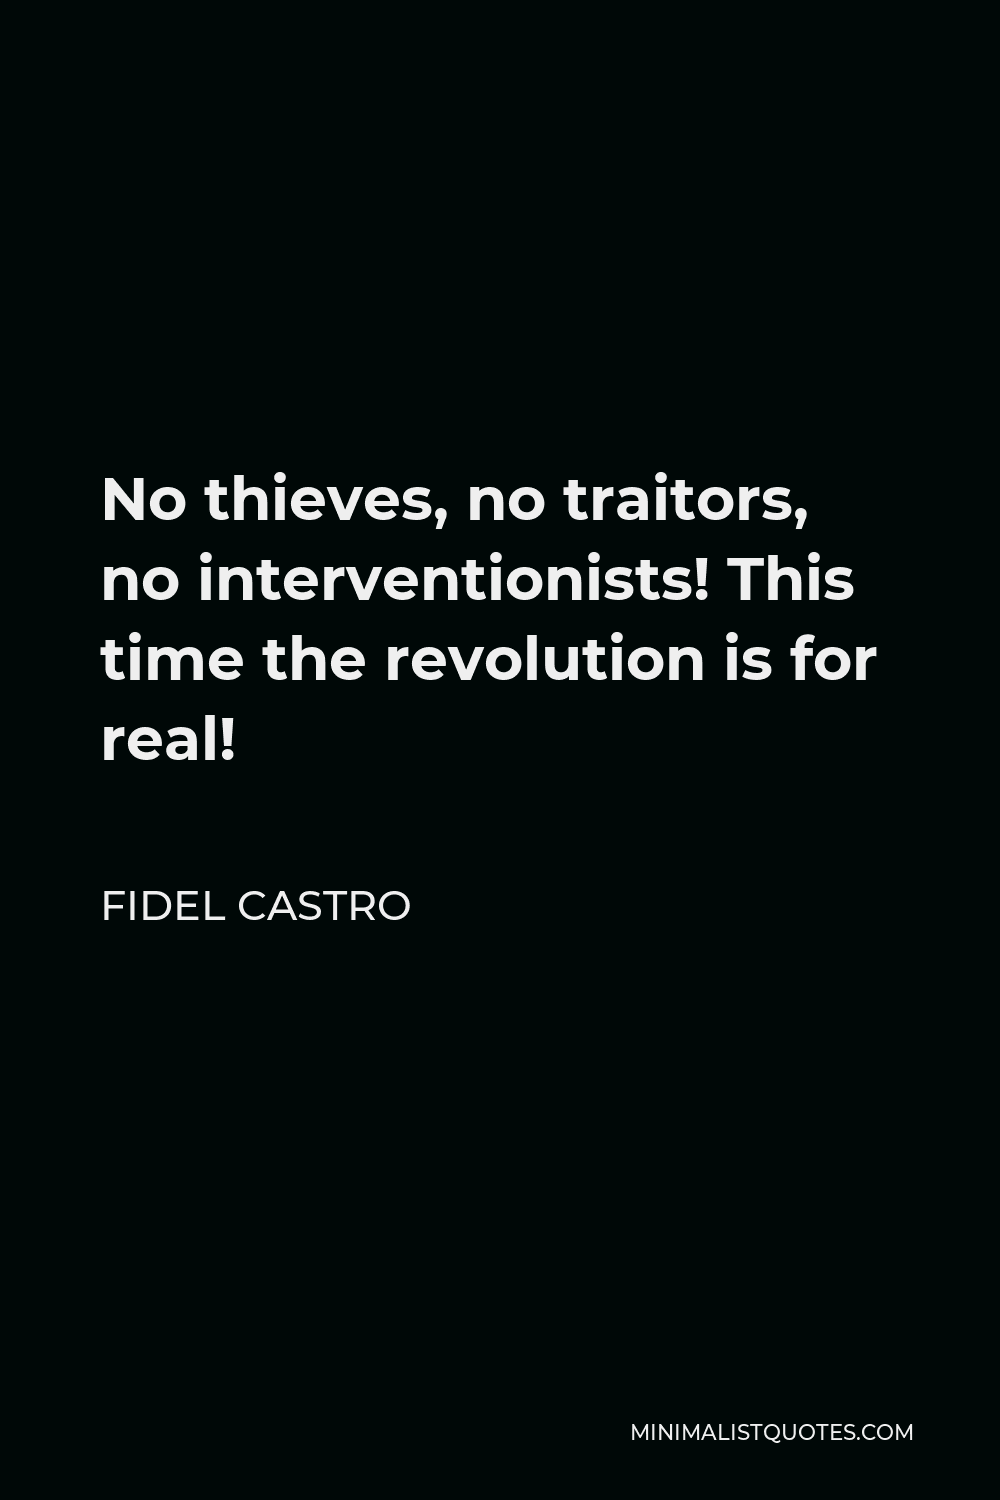 Fidel Castro Quote - No thieves, no traitors, no interventionists! This time the revolution is for real!